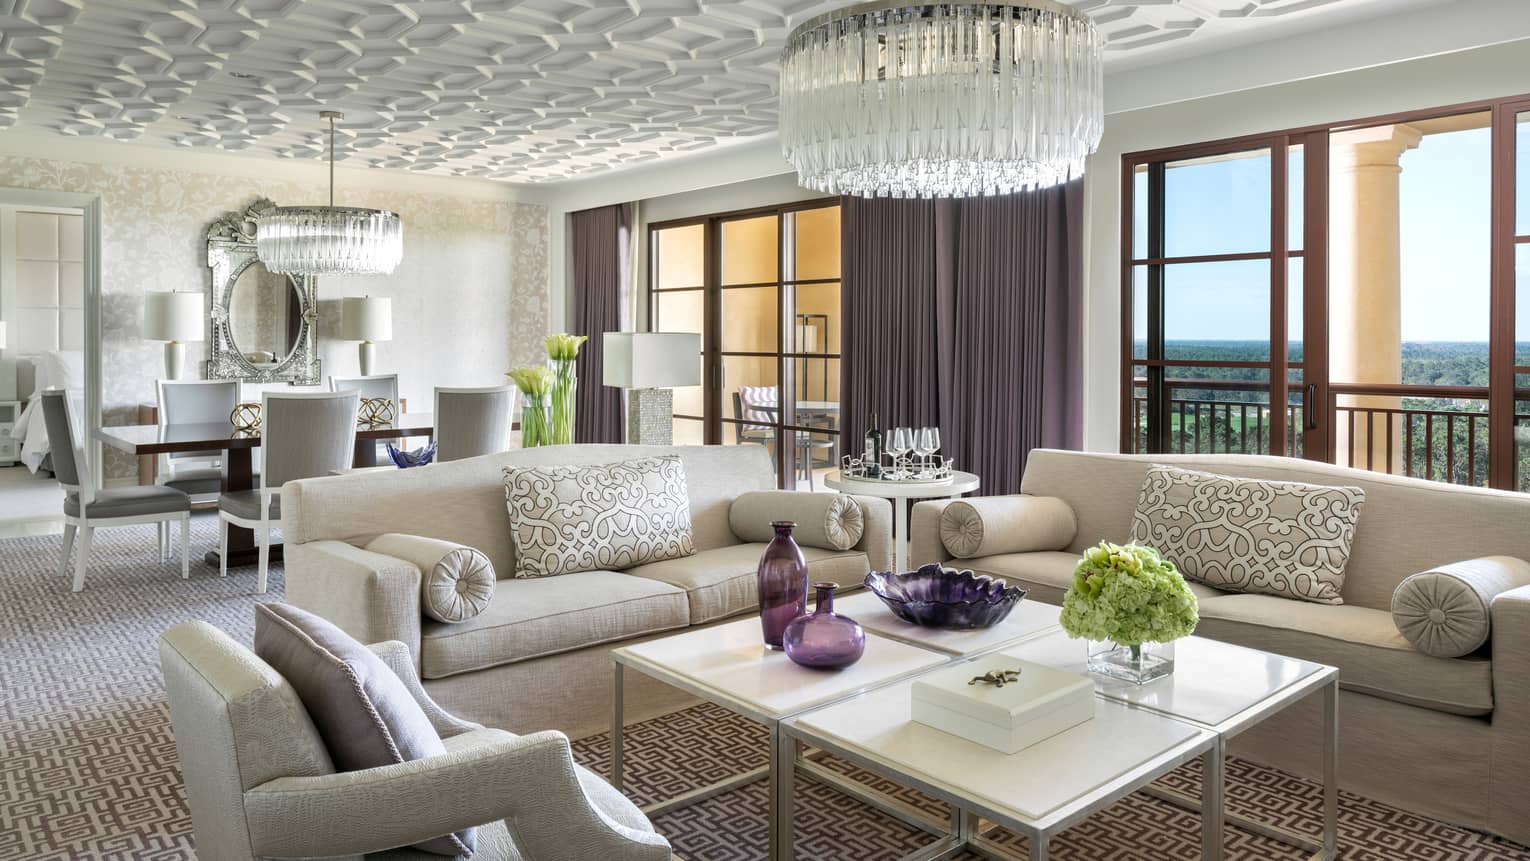 Grand Suite white sofas, armchair around coffee table with purple vases under crystal chandelier, sunny windows